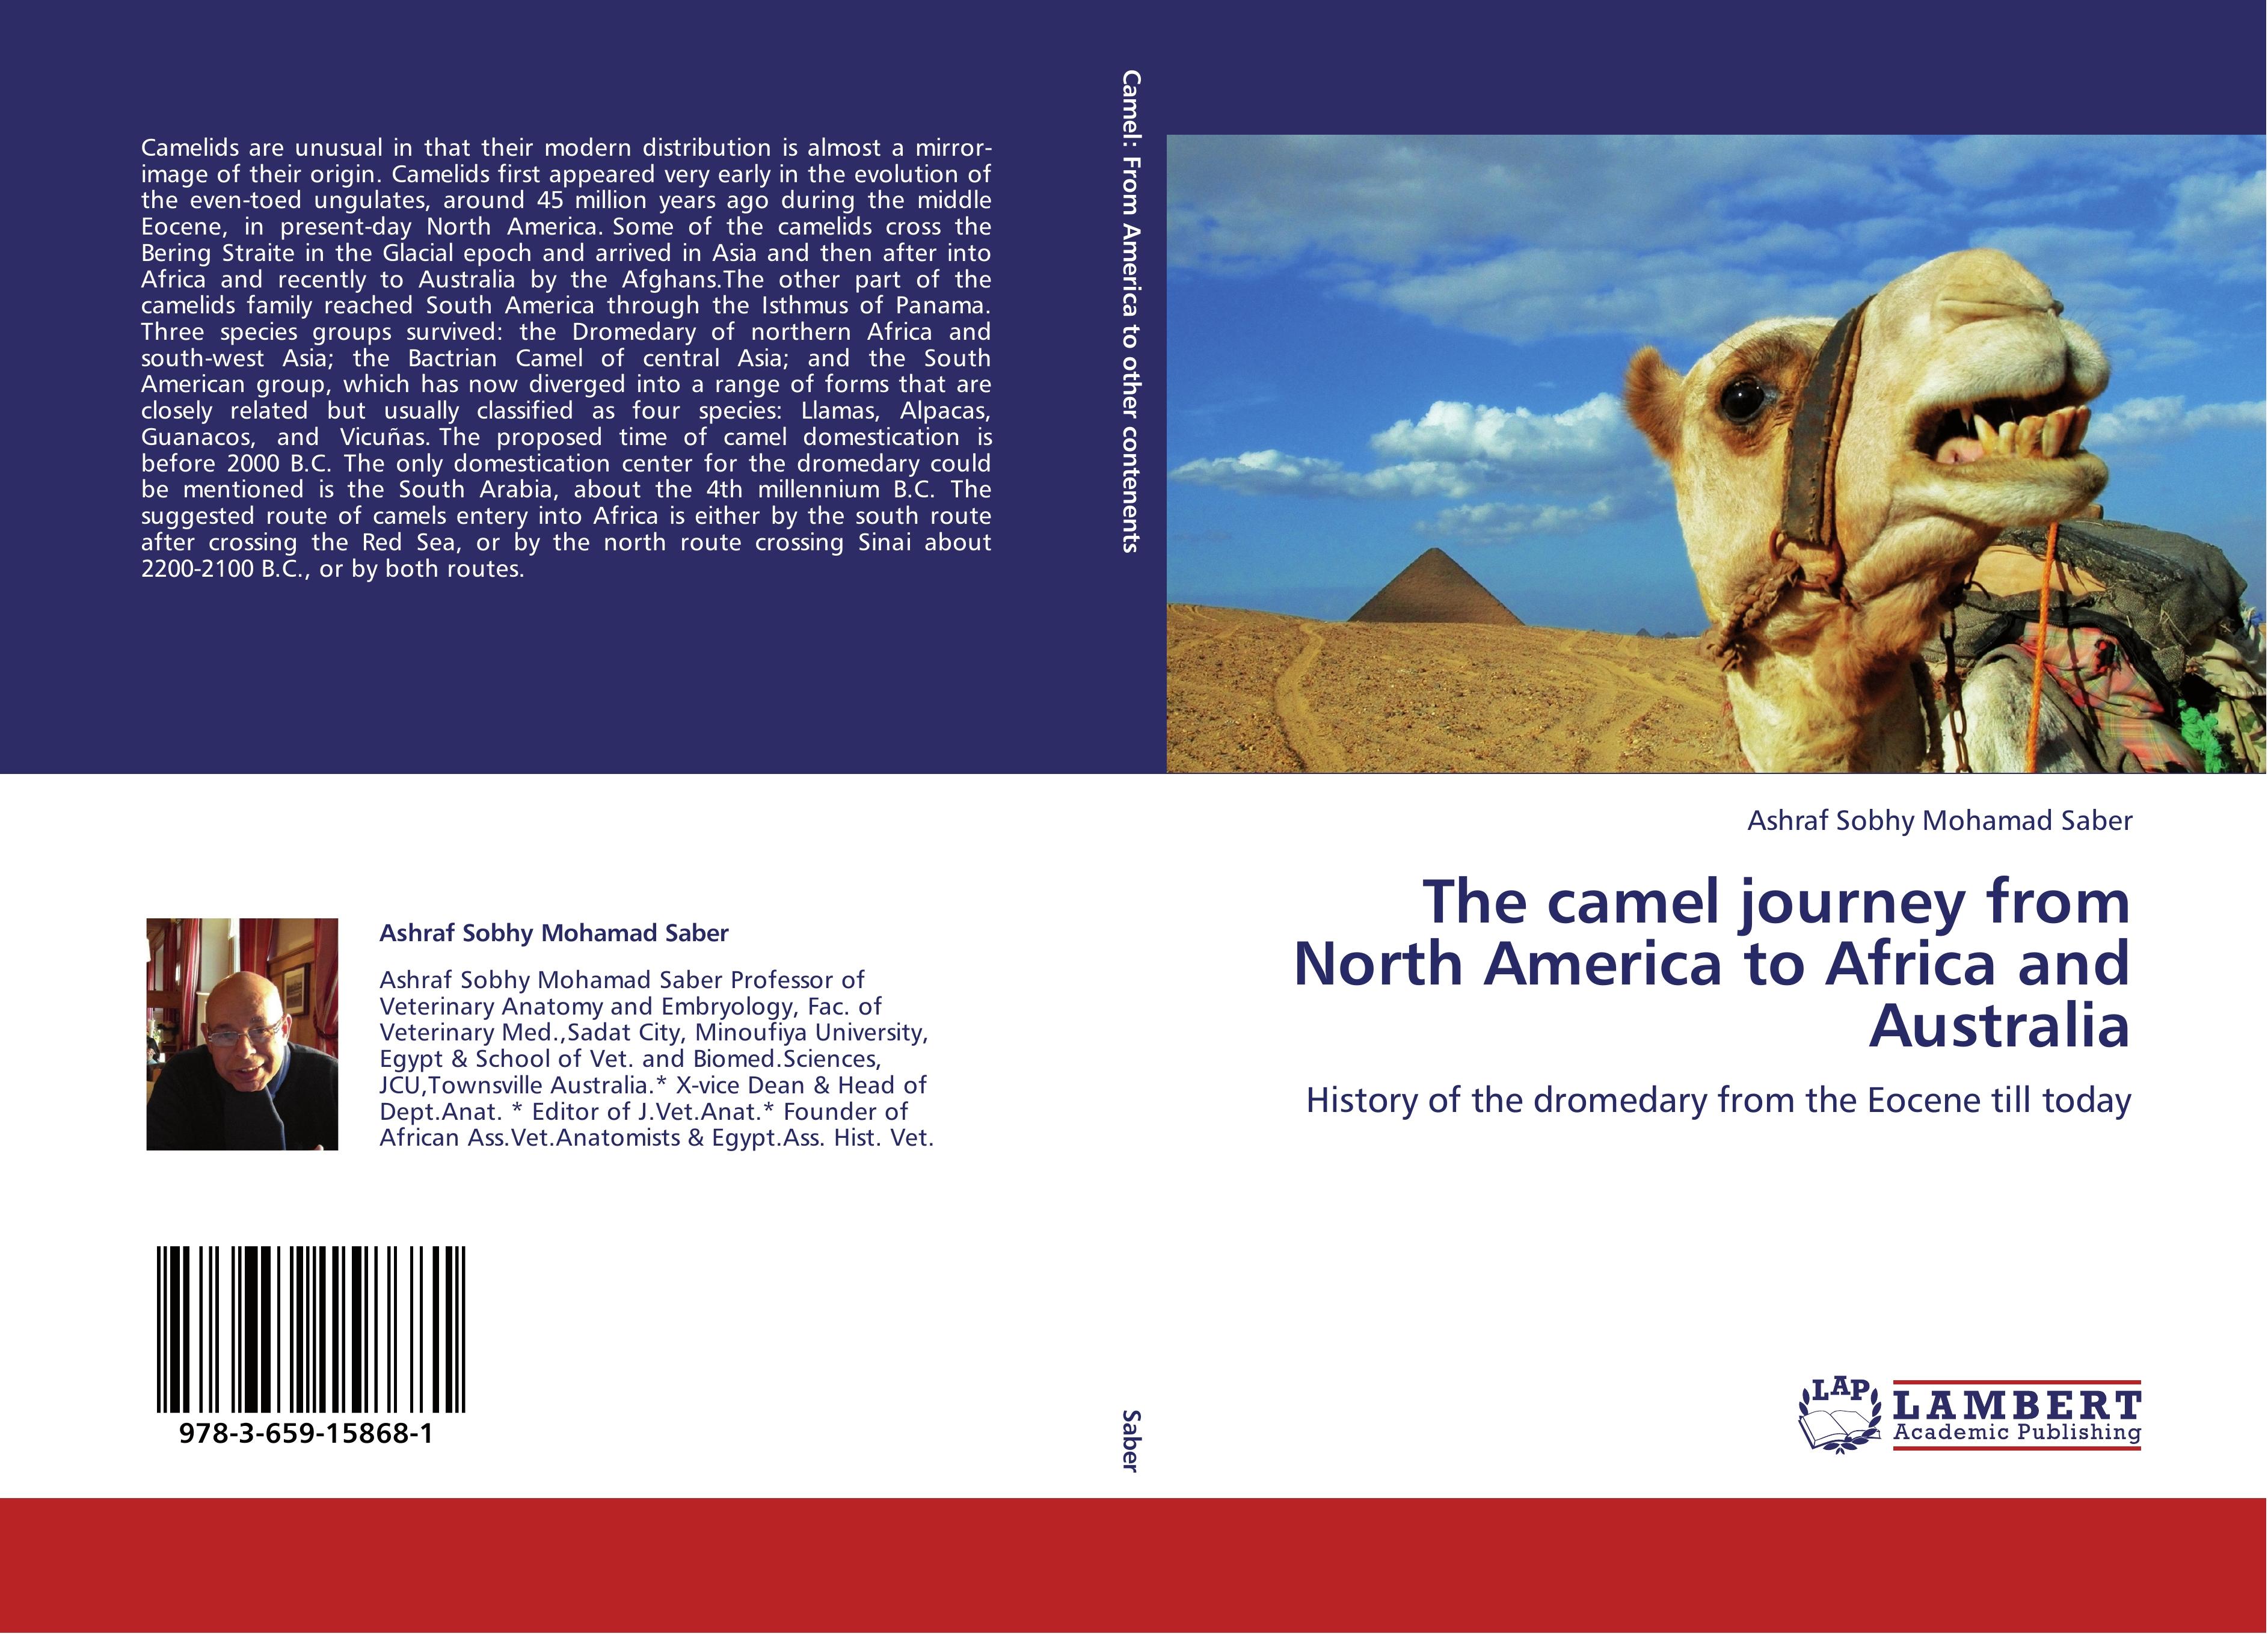 The camel journey from North America to Africa and Australia - Ashraf Sobhy Mohamad Saber